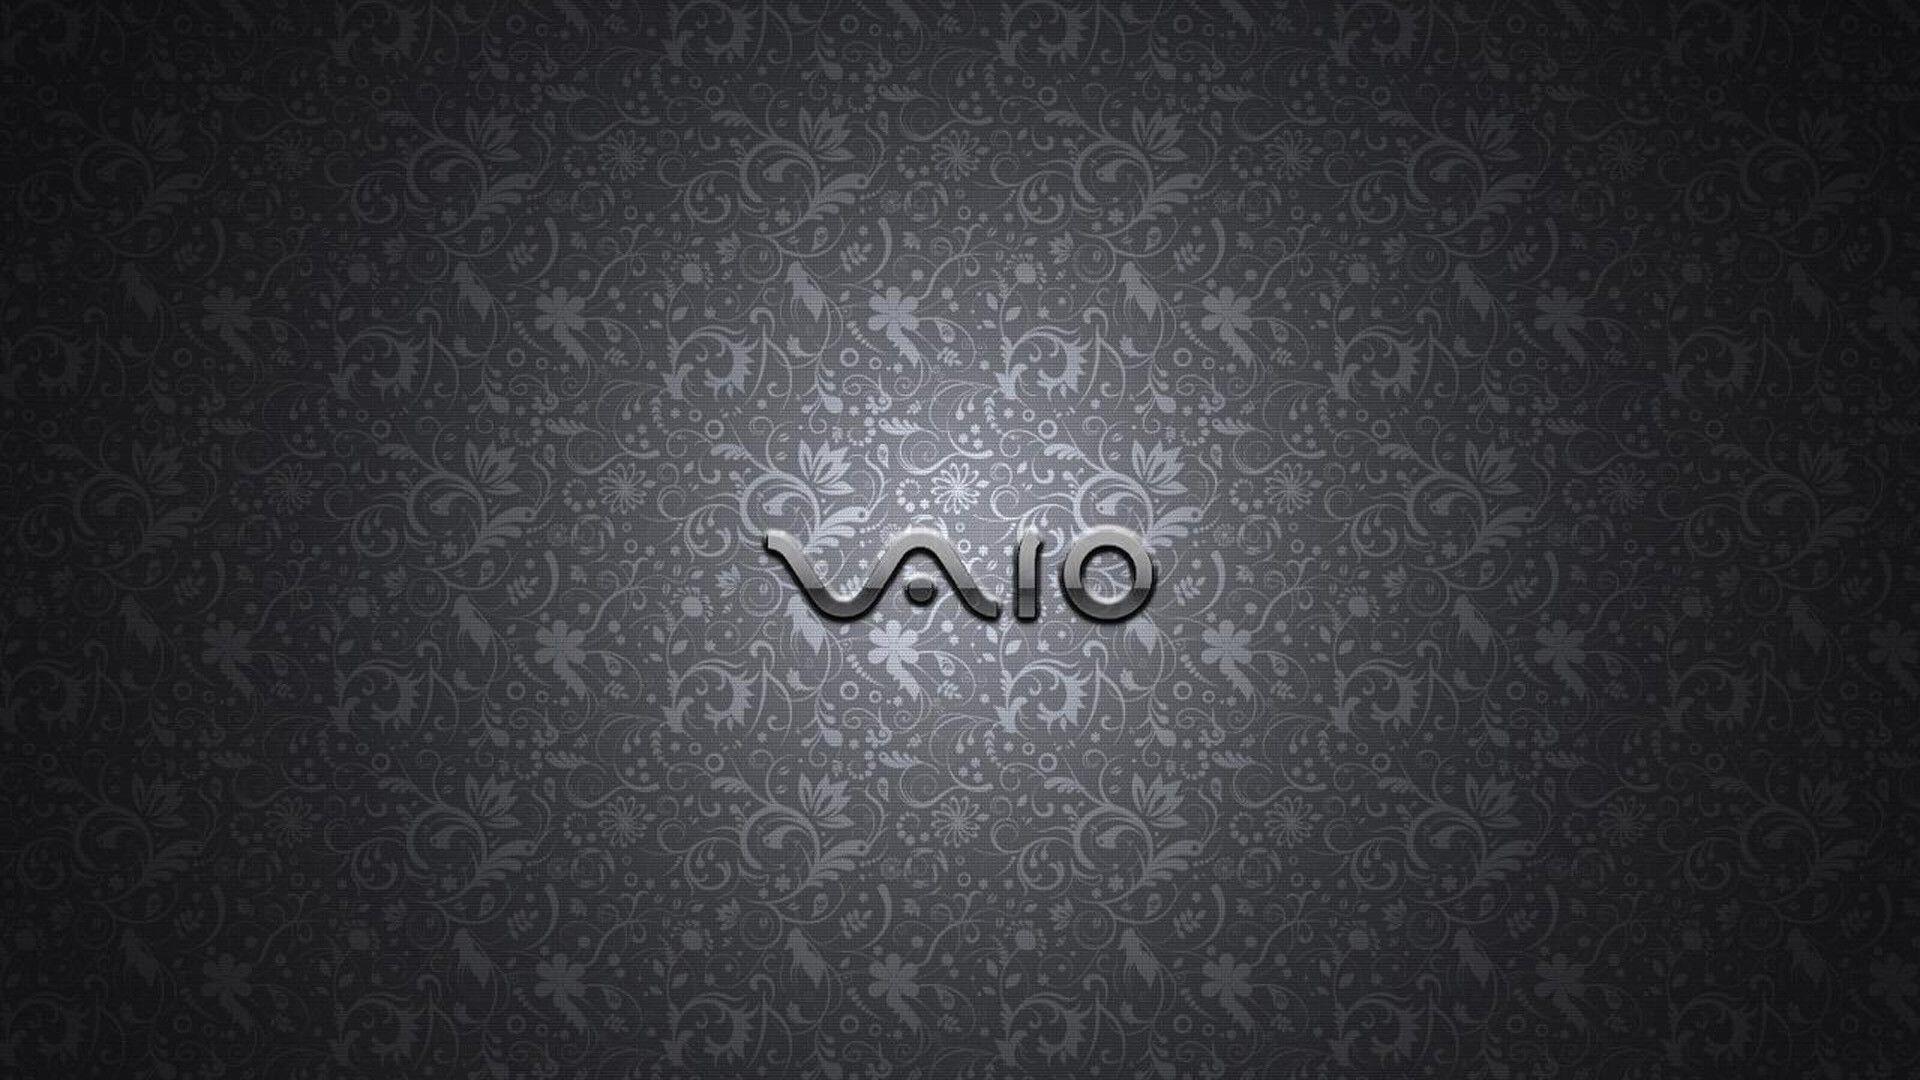 Sony Vaio 3d Wallpapers Top Free Sony Vaio 3d Backgrounds Wallpaperaccess